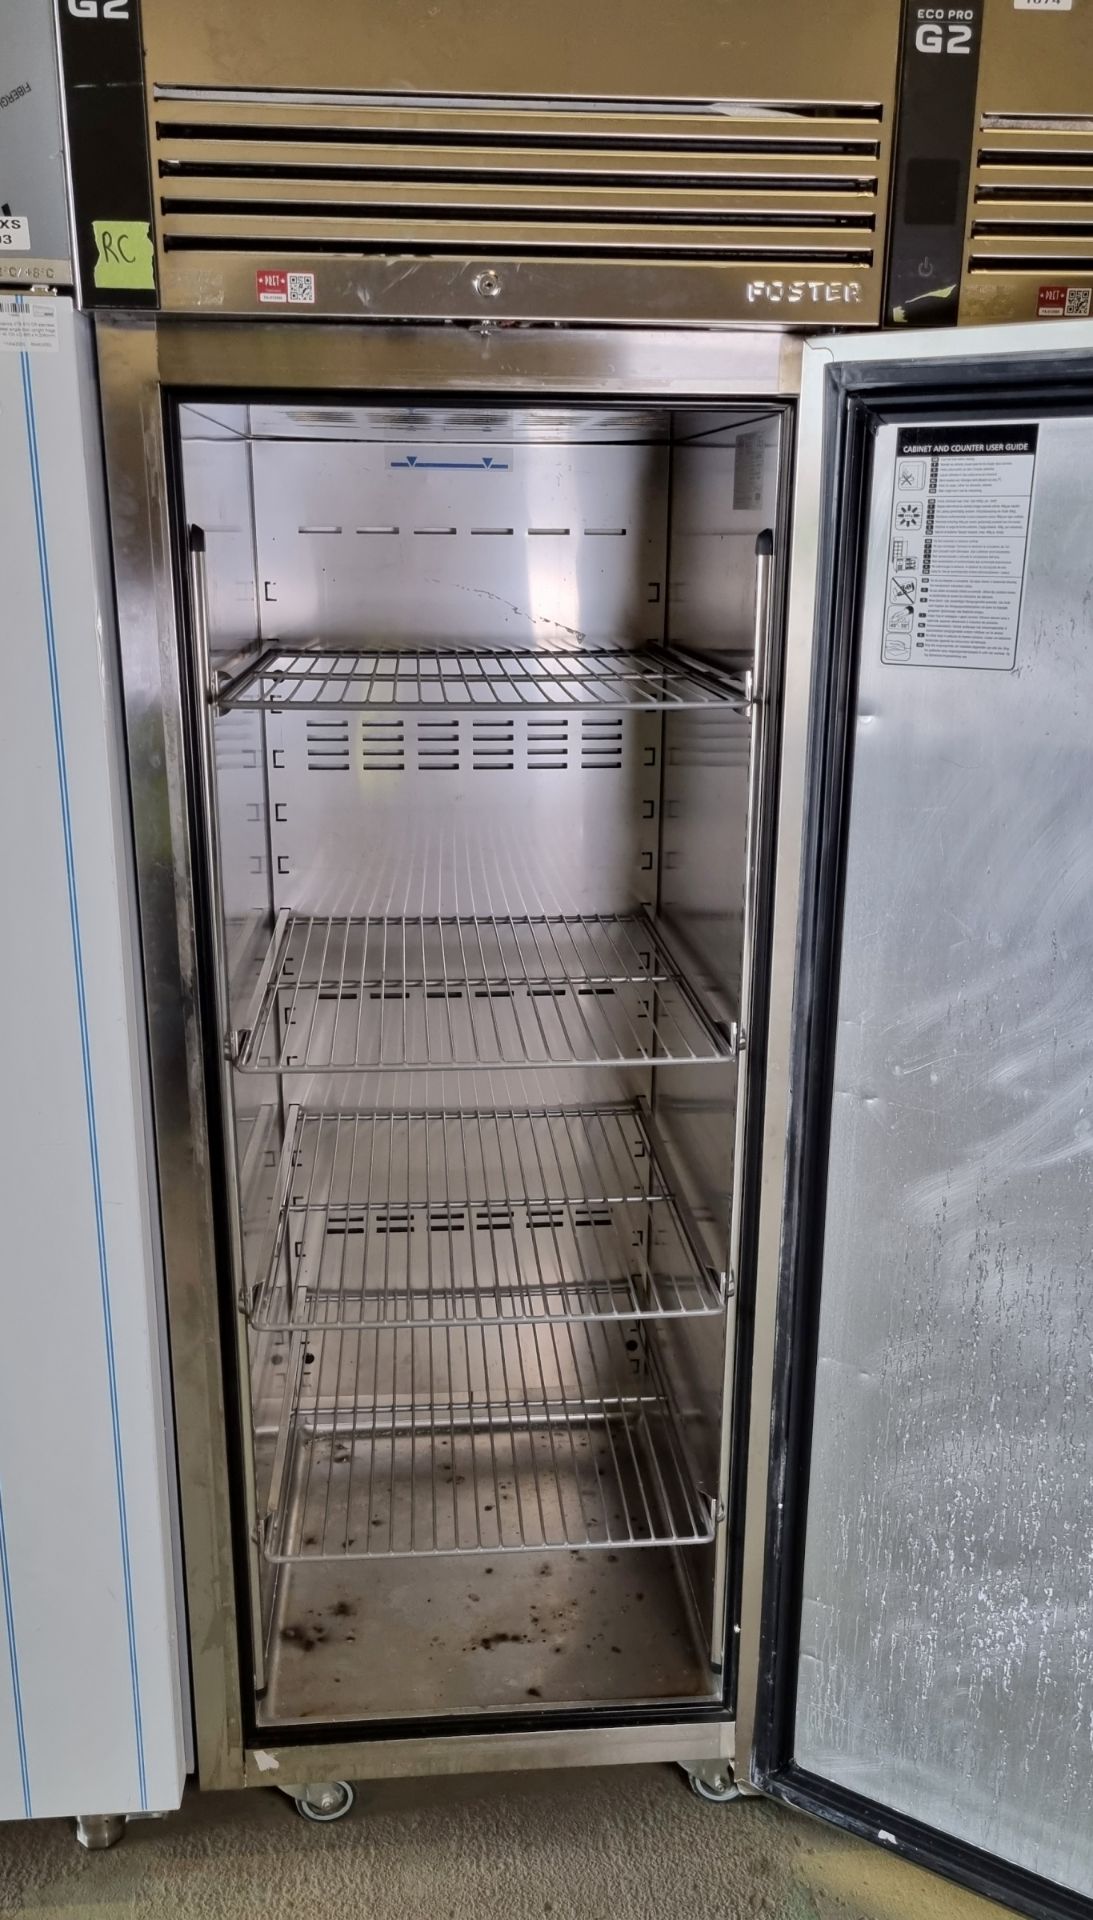 Foster EP700L Eco Pro G2 stainless steel single door upright freezer - W 700 x D 820 x H 2070mm - Image 3 of 4